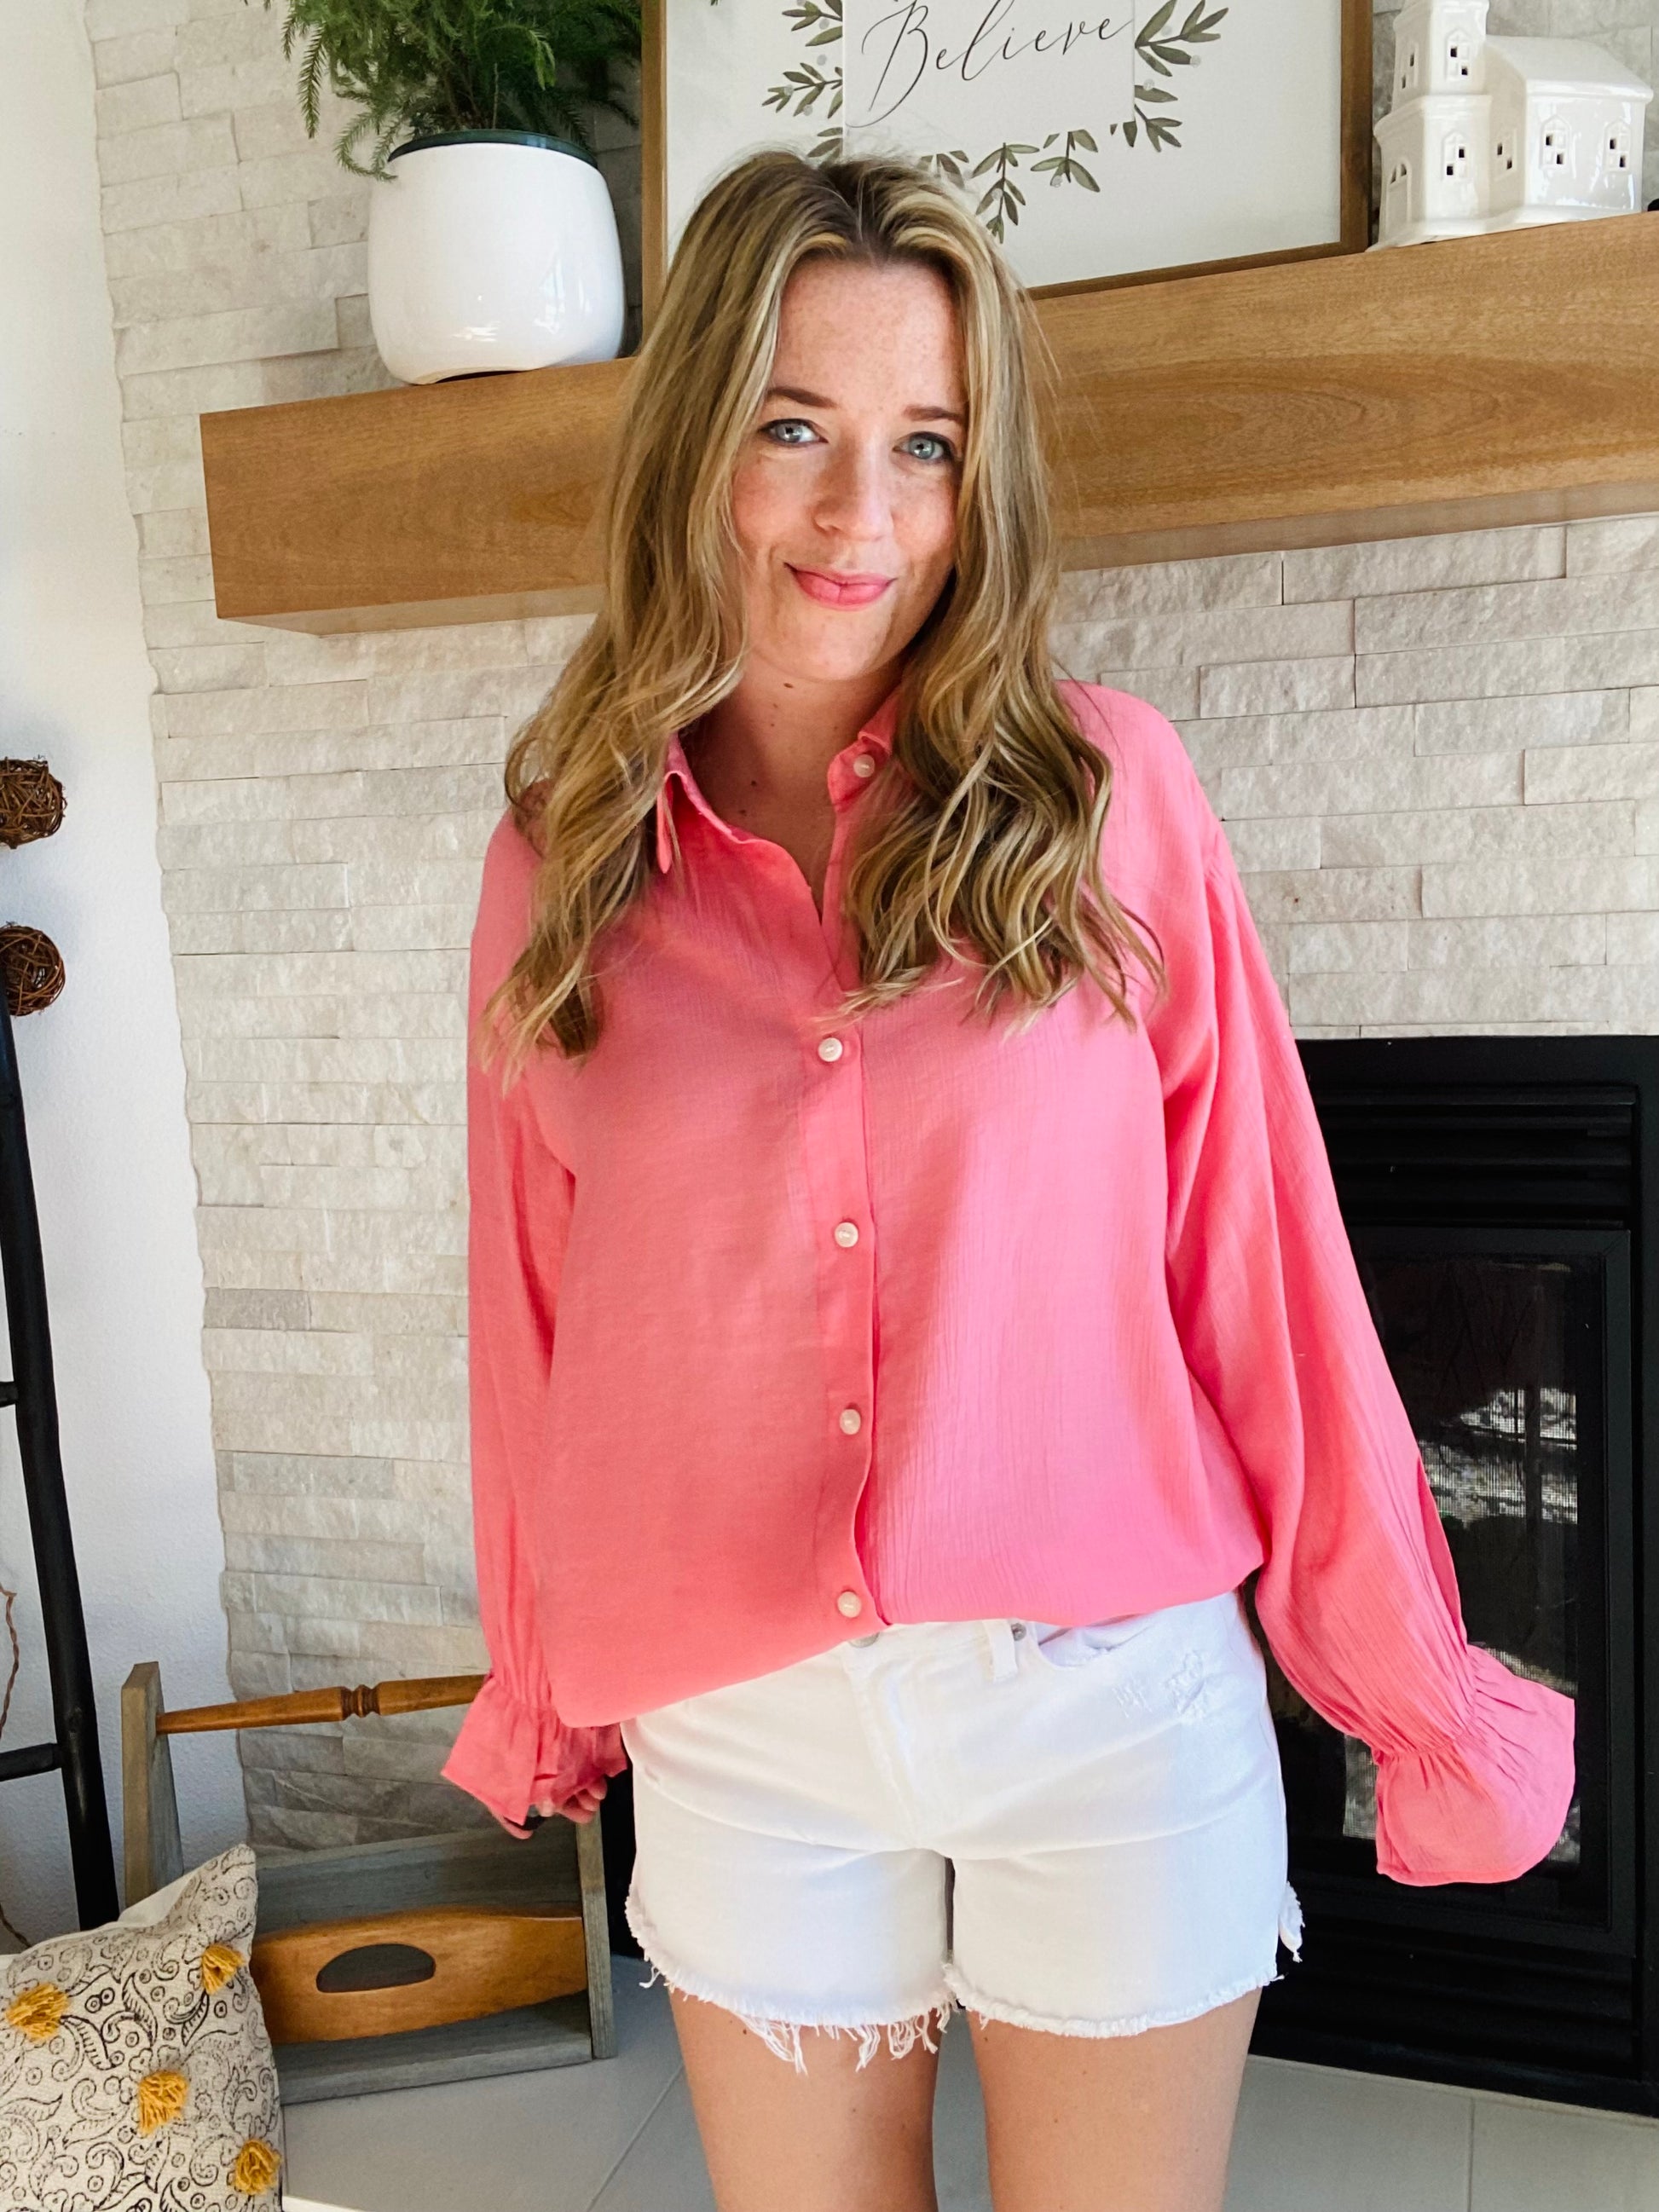 This Gauzy Bell Sleeve Blouse is crafted from lightweight polyester and spandex for an ultra-airy feel and relaxed fit. This blouse features baby bell sleeves and a collar, with functional buttons to ensure a perfect fit. The gauze fabric has a mild sheerness for an elegant look.